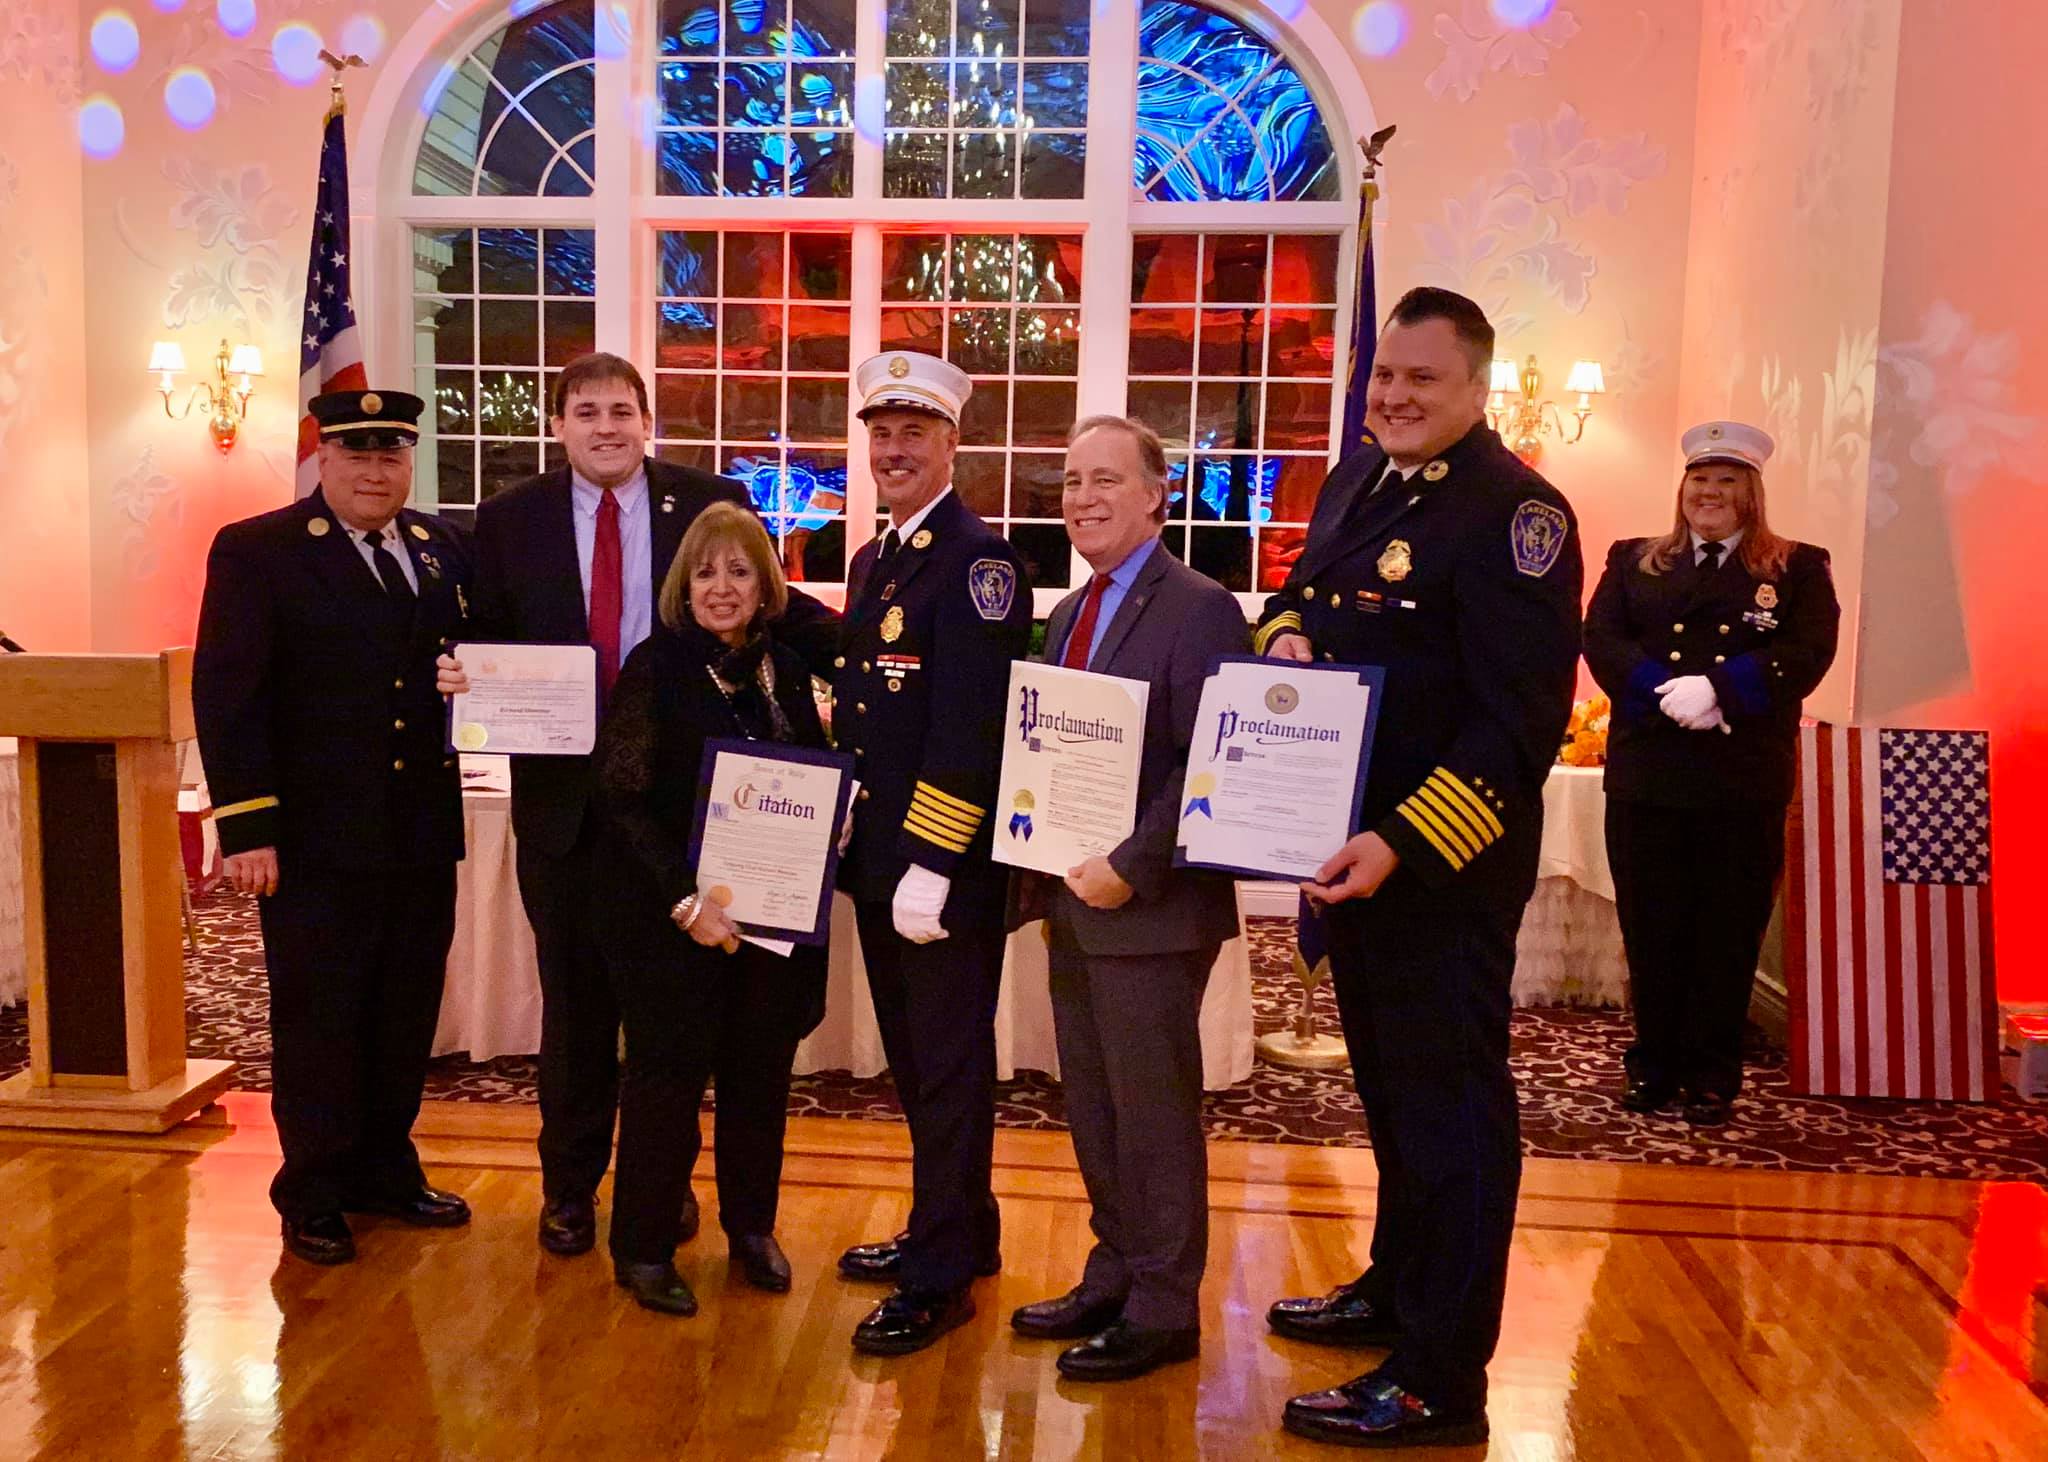 Pictured: Assemblyman Doug Smith (5th Assembly District) second from left with the Lakeland Fire Department at their annual installation dinner